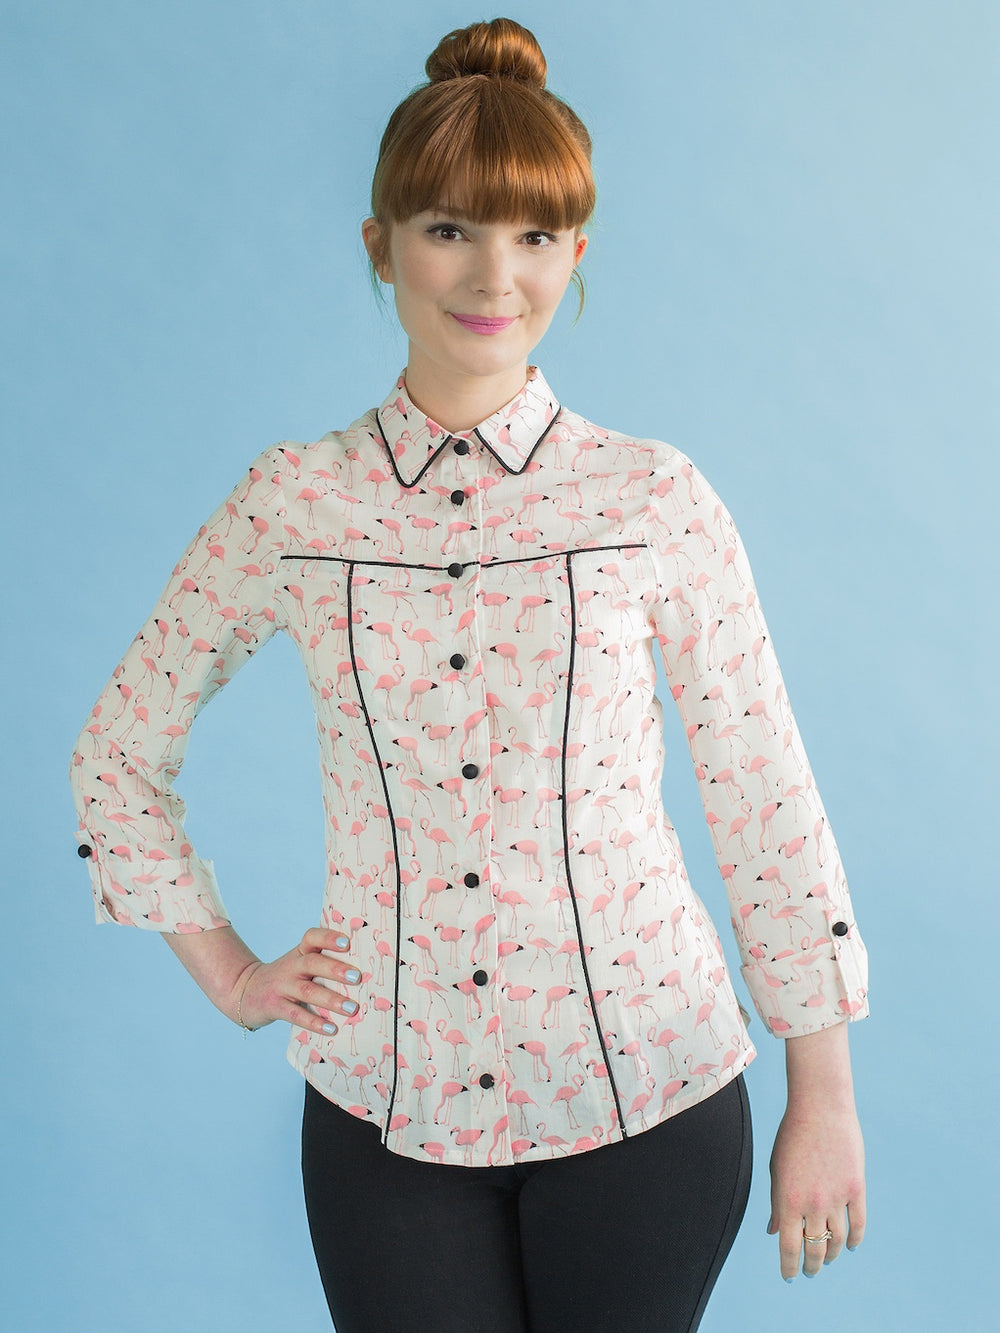 Woman wearing the Rosa Shirt sewing pattern from Tilly and the Buttons on The Fold Line. A shirt pattern made in cotton lawn, chambray, lighter weight denim, fine needlecord, double gauze, linen blends, viscose (rayon), or shirting cotton fabric, featurin